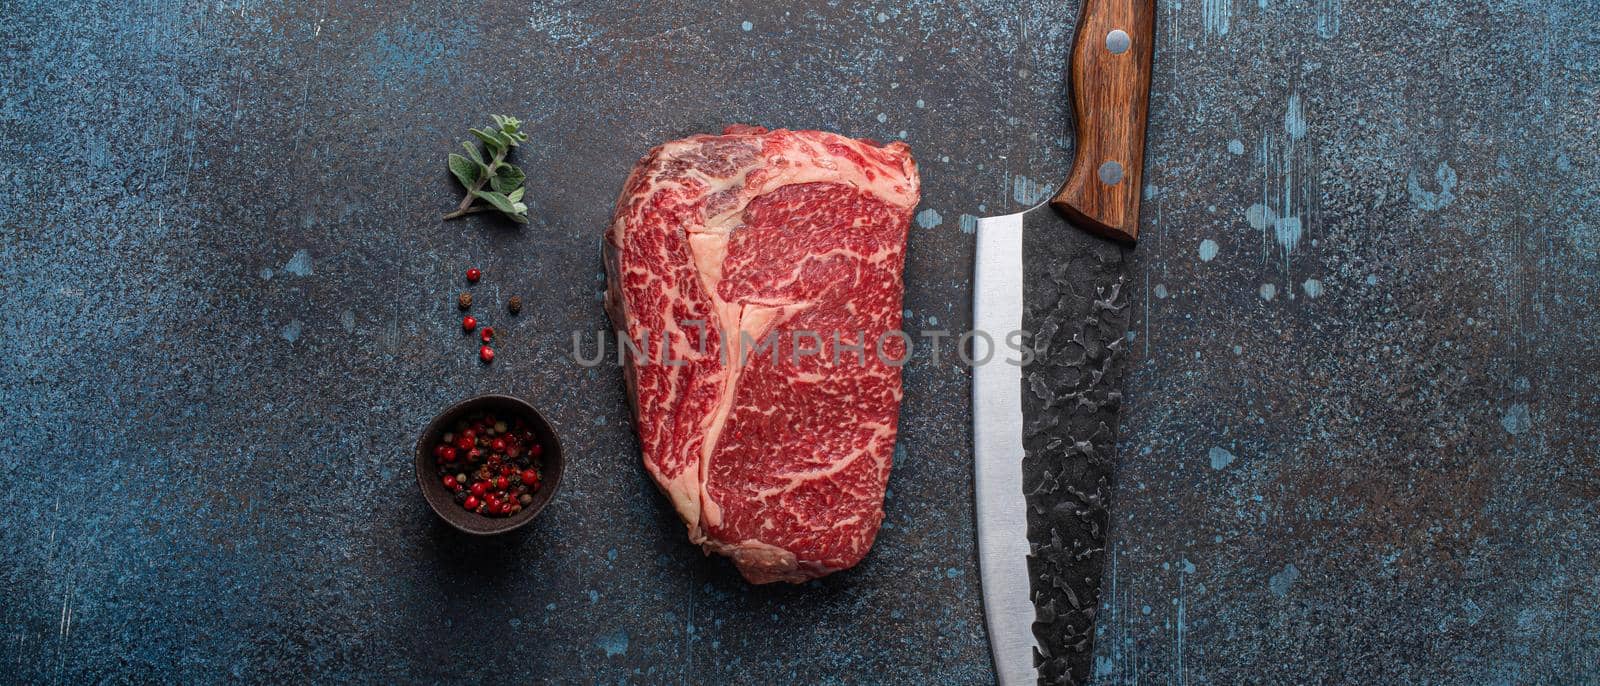 Raw meat beef marbled prime cut steak Ribeye on rustic concrete kitchen table by its_al_dente